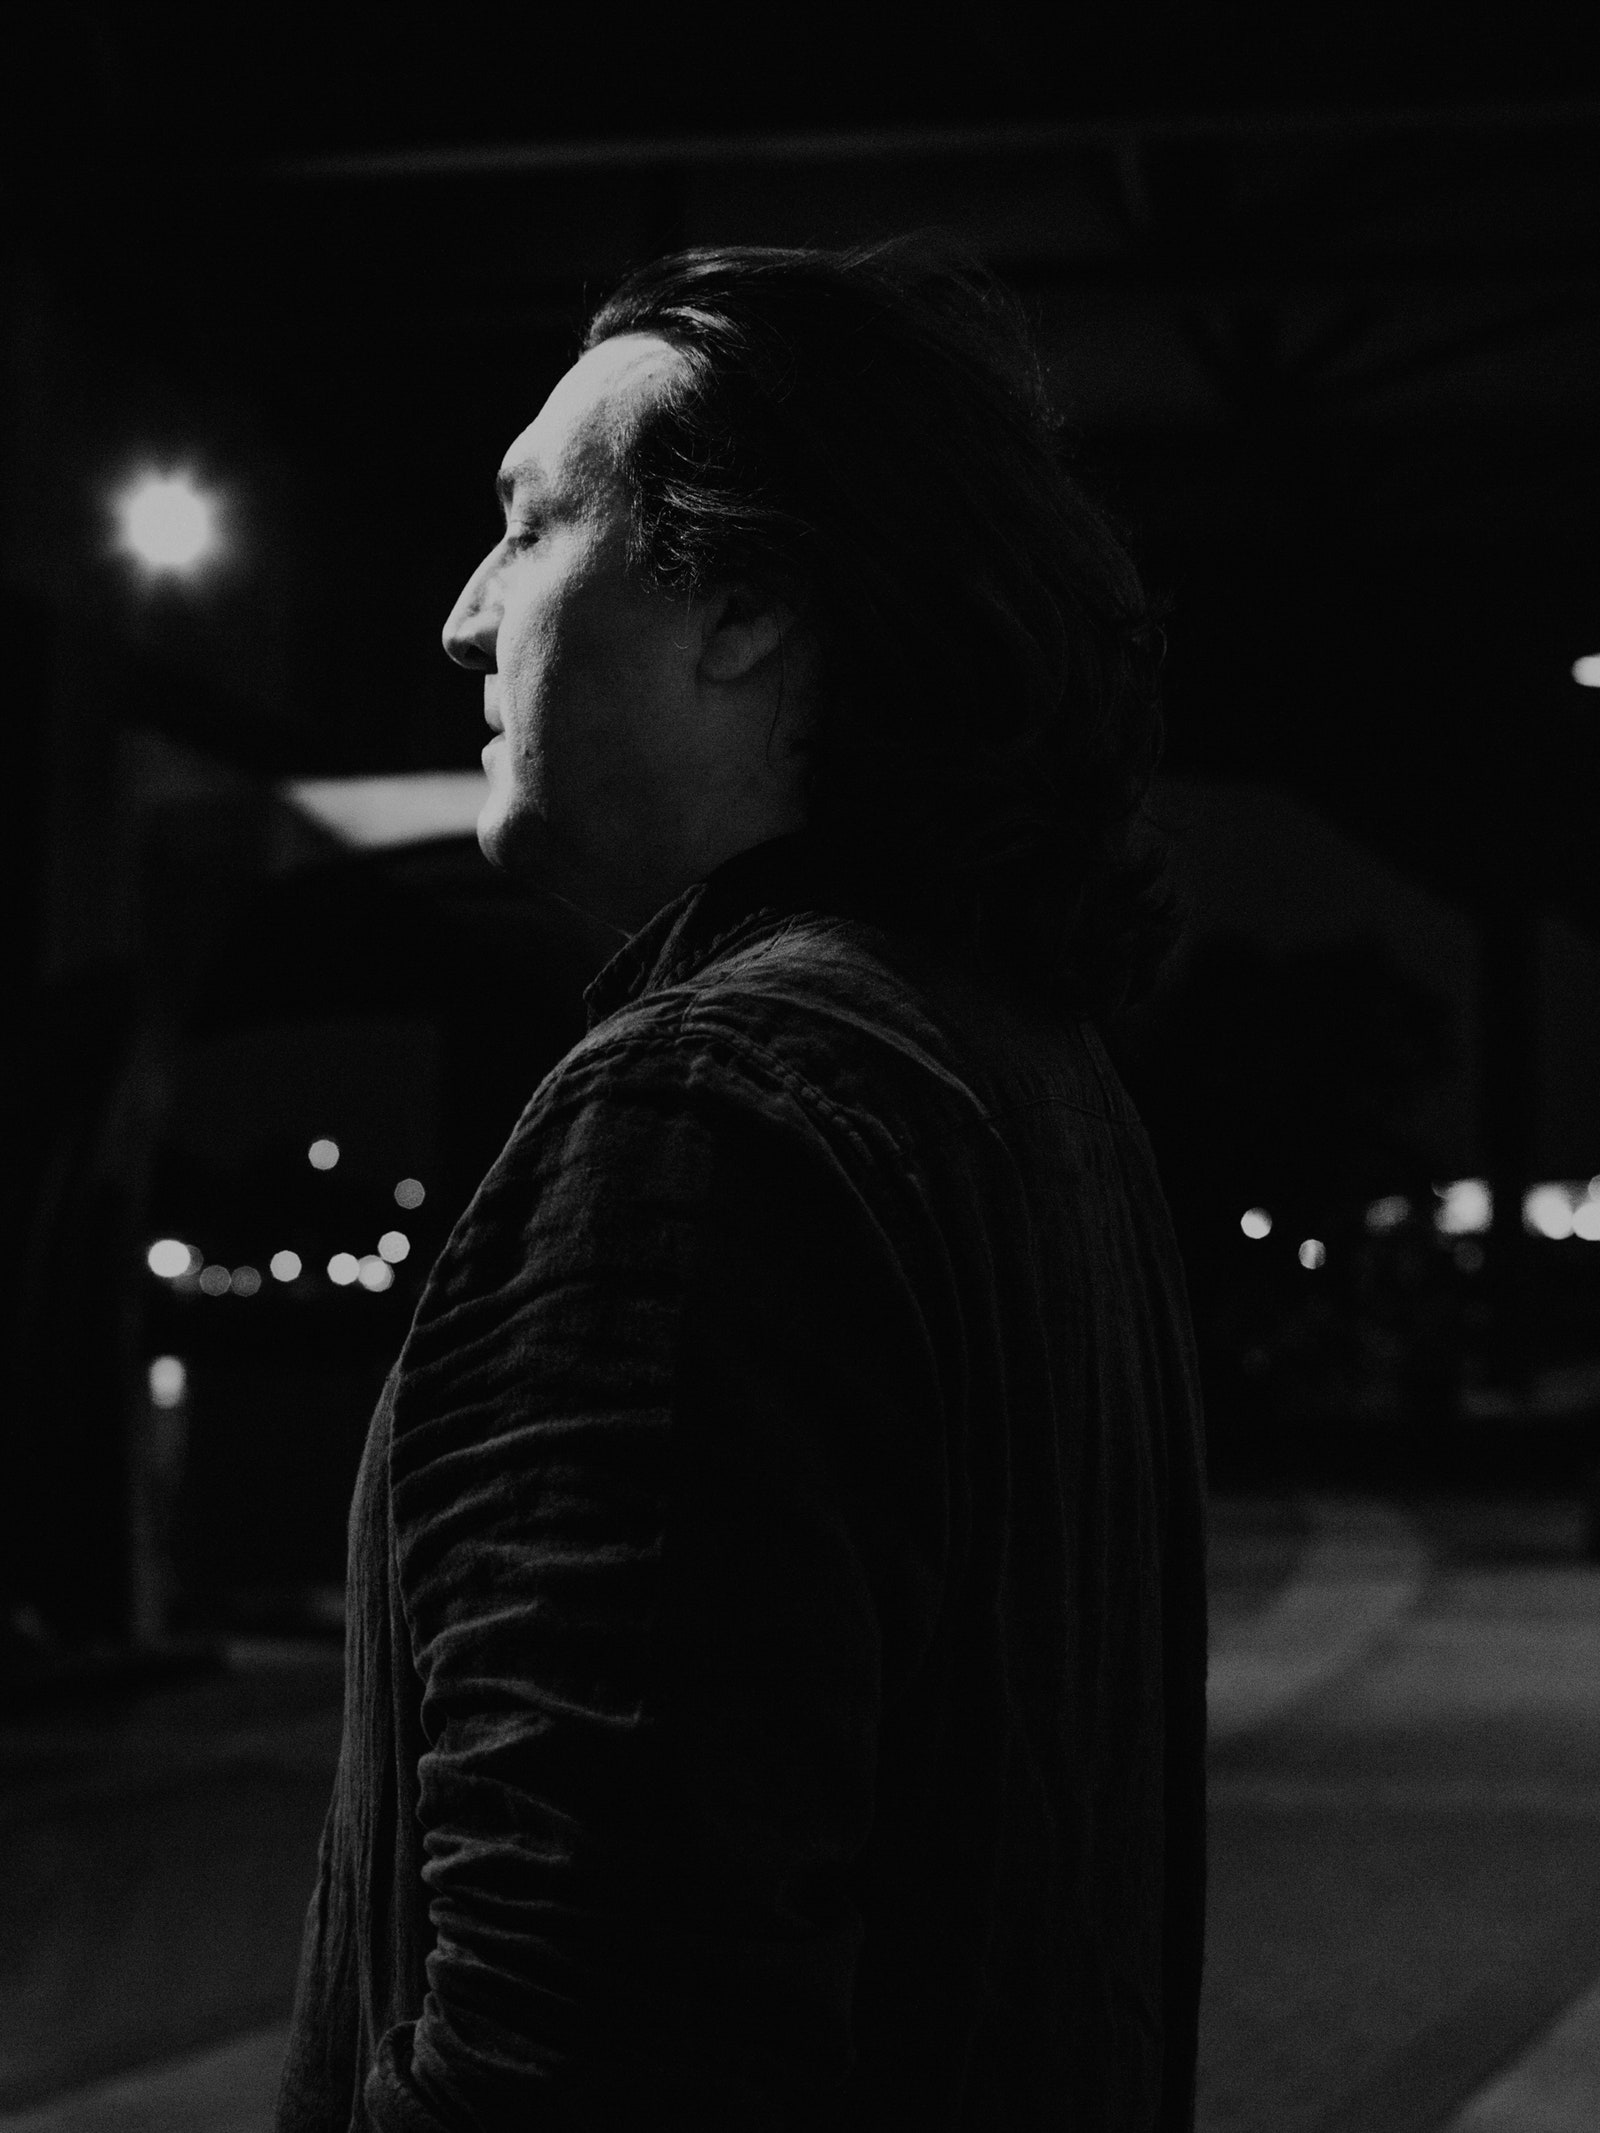 Black and white portrait of a person with long dark hair closing their eyes while standing on a street at night